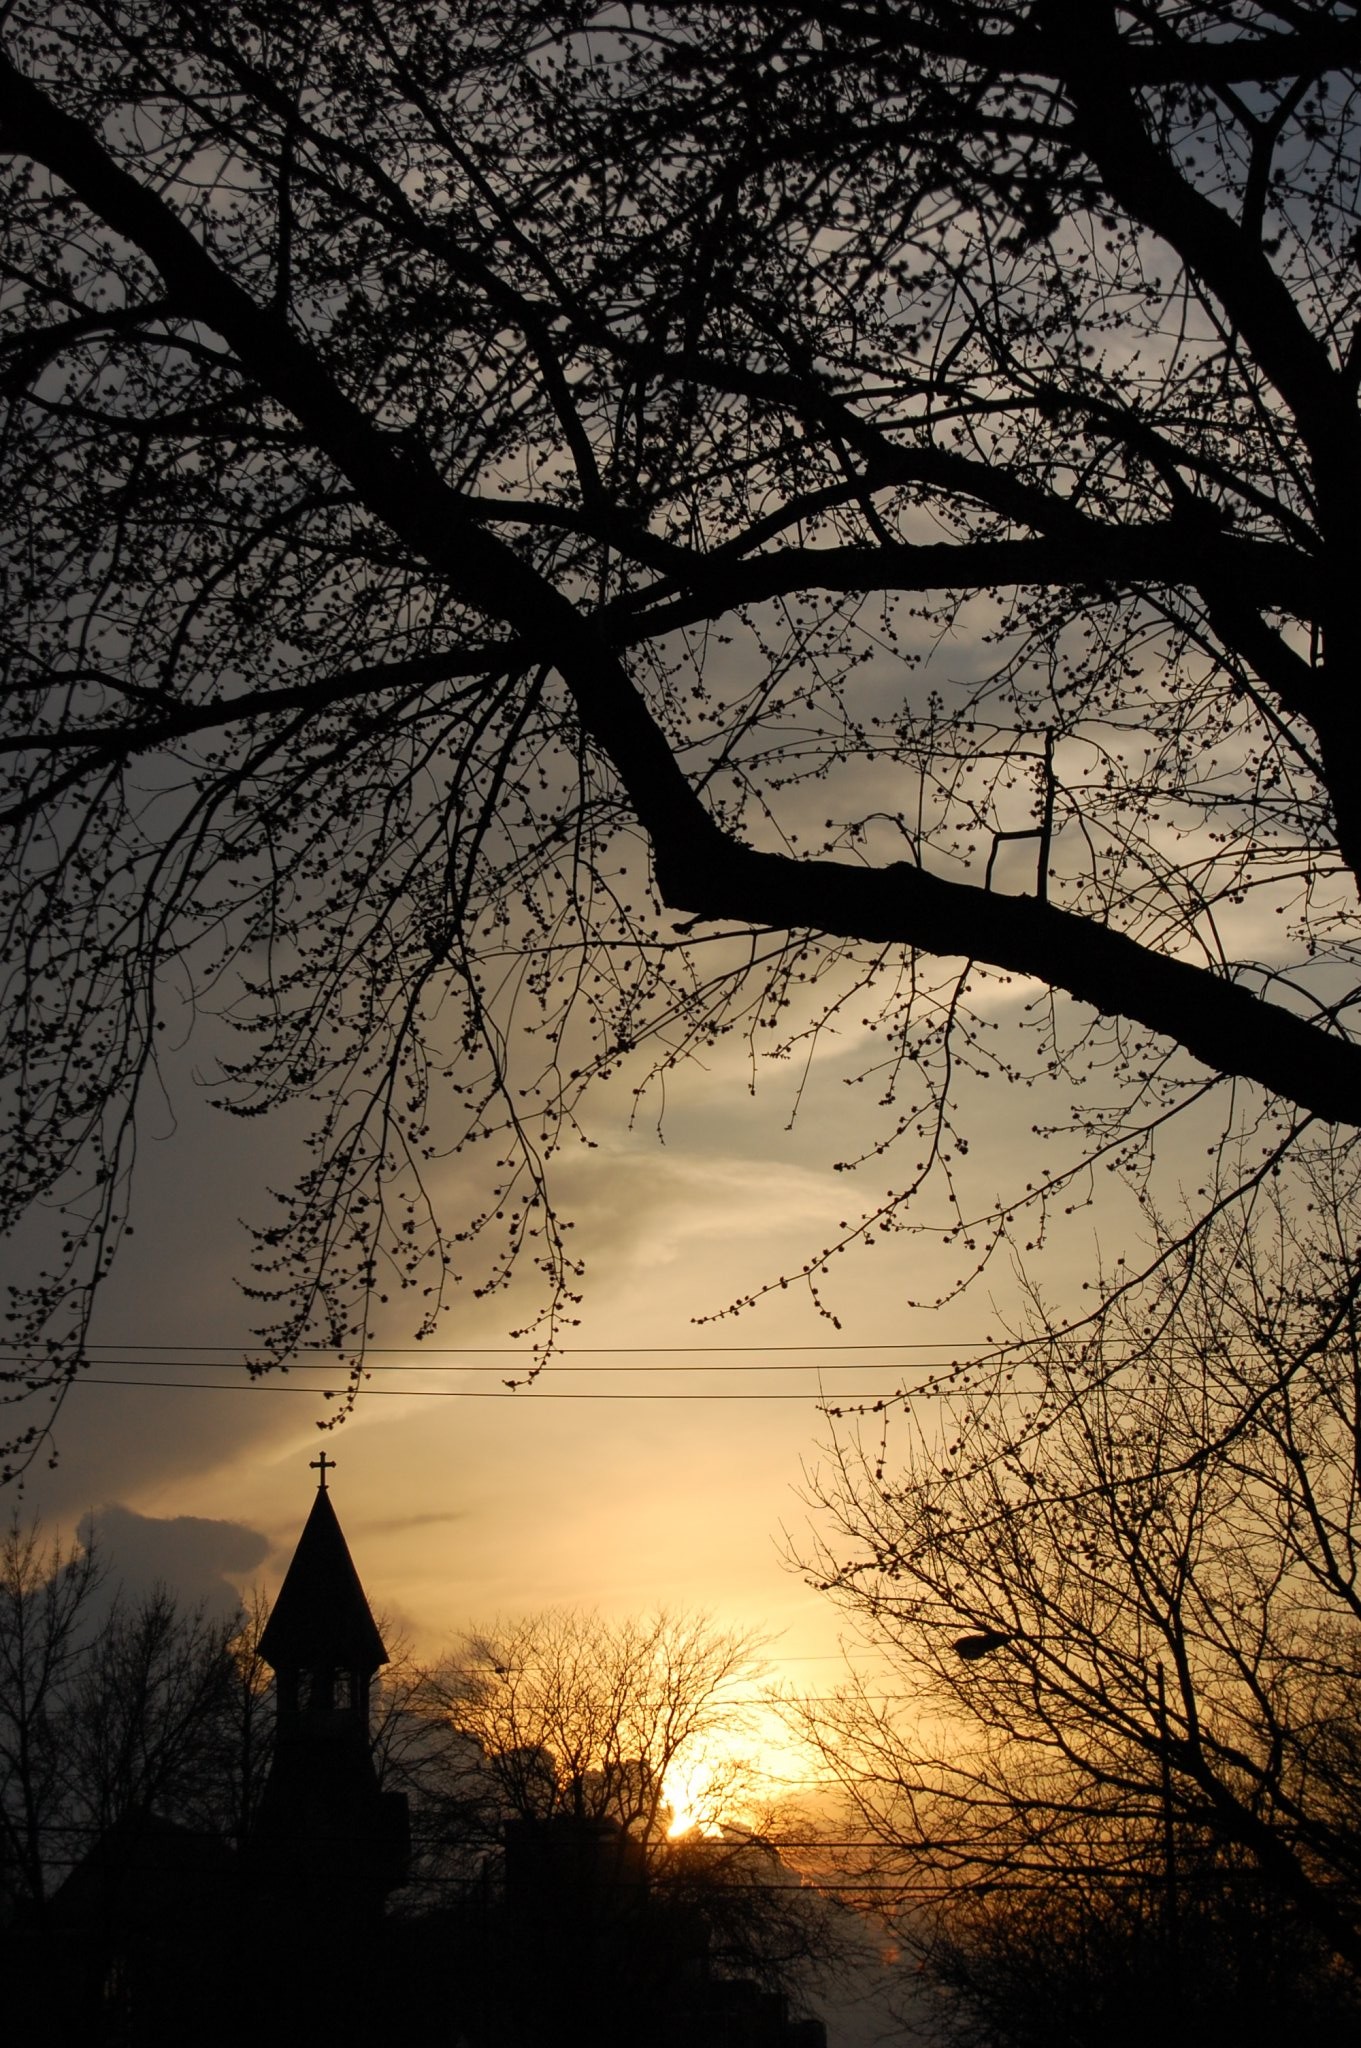  church steeple Sunset with overhanging trees